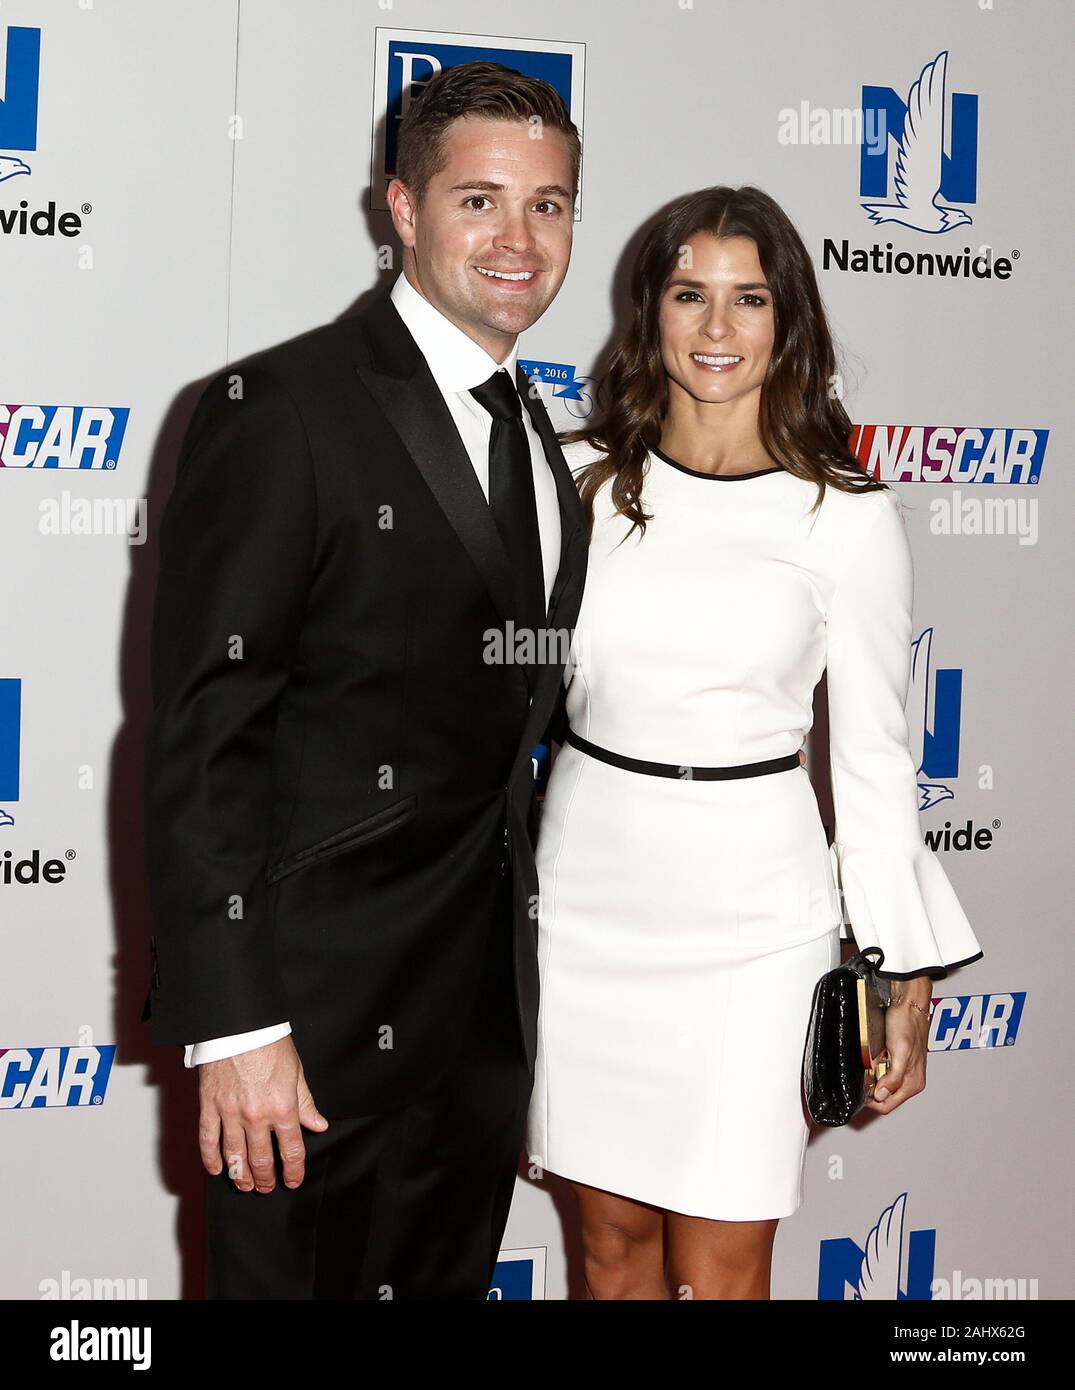 NEW YORK - SEPT 27: Ricky Stenhouse Jr (L) and Danica Patrick attend the 2016 NASCAR Foundation Honors Gala at Marriott Marquis on September 27, 2016. Stock Photo